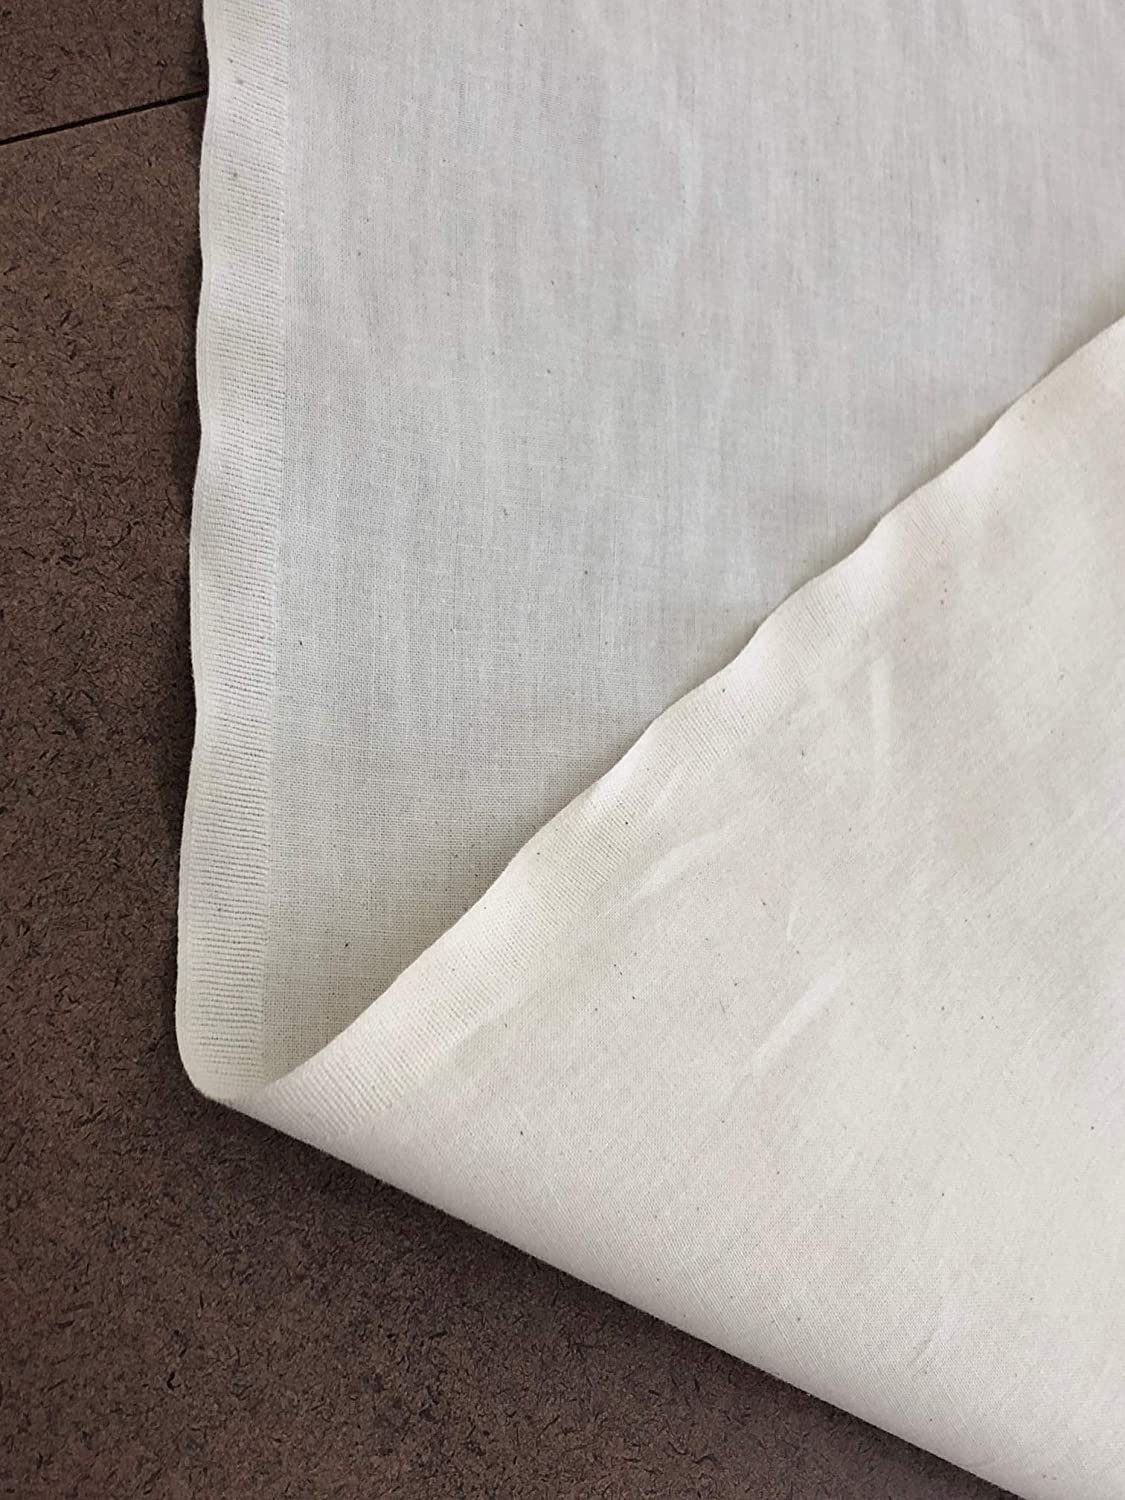 AK Trading 60 inch Wide Natural Muslin Fabric, 100% Cotton Fabric, Unbleached 1 Yard